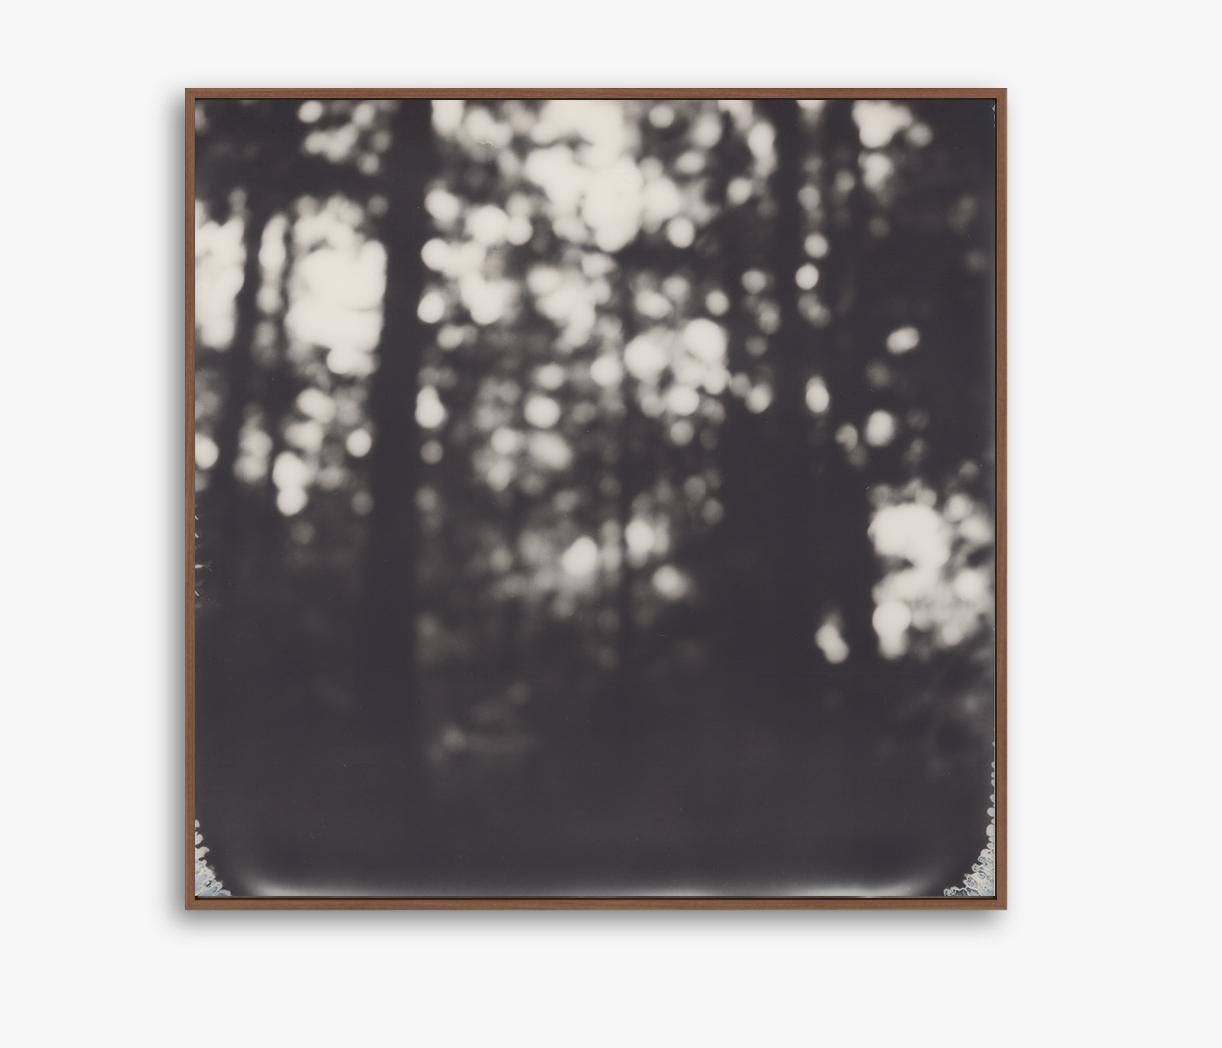 Into the Woods - 21st Century Contemporary Photographic Nature Print - Black & White Polaroid

Into the Woods is a beautiful  example of Pia Clodi's ability to inject beauty and sentiment  into the everyday. This high contract black and white